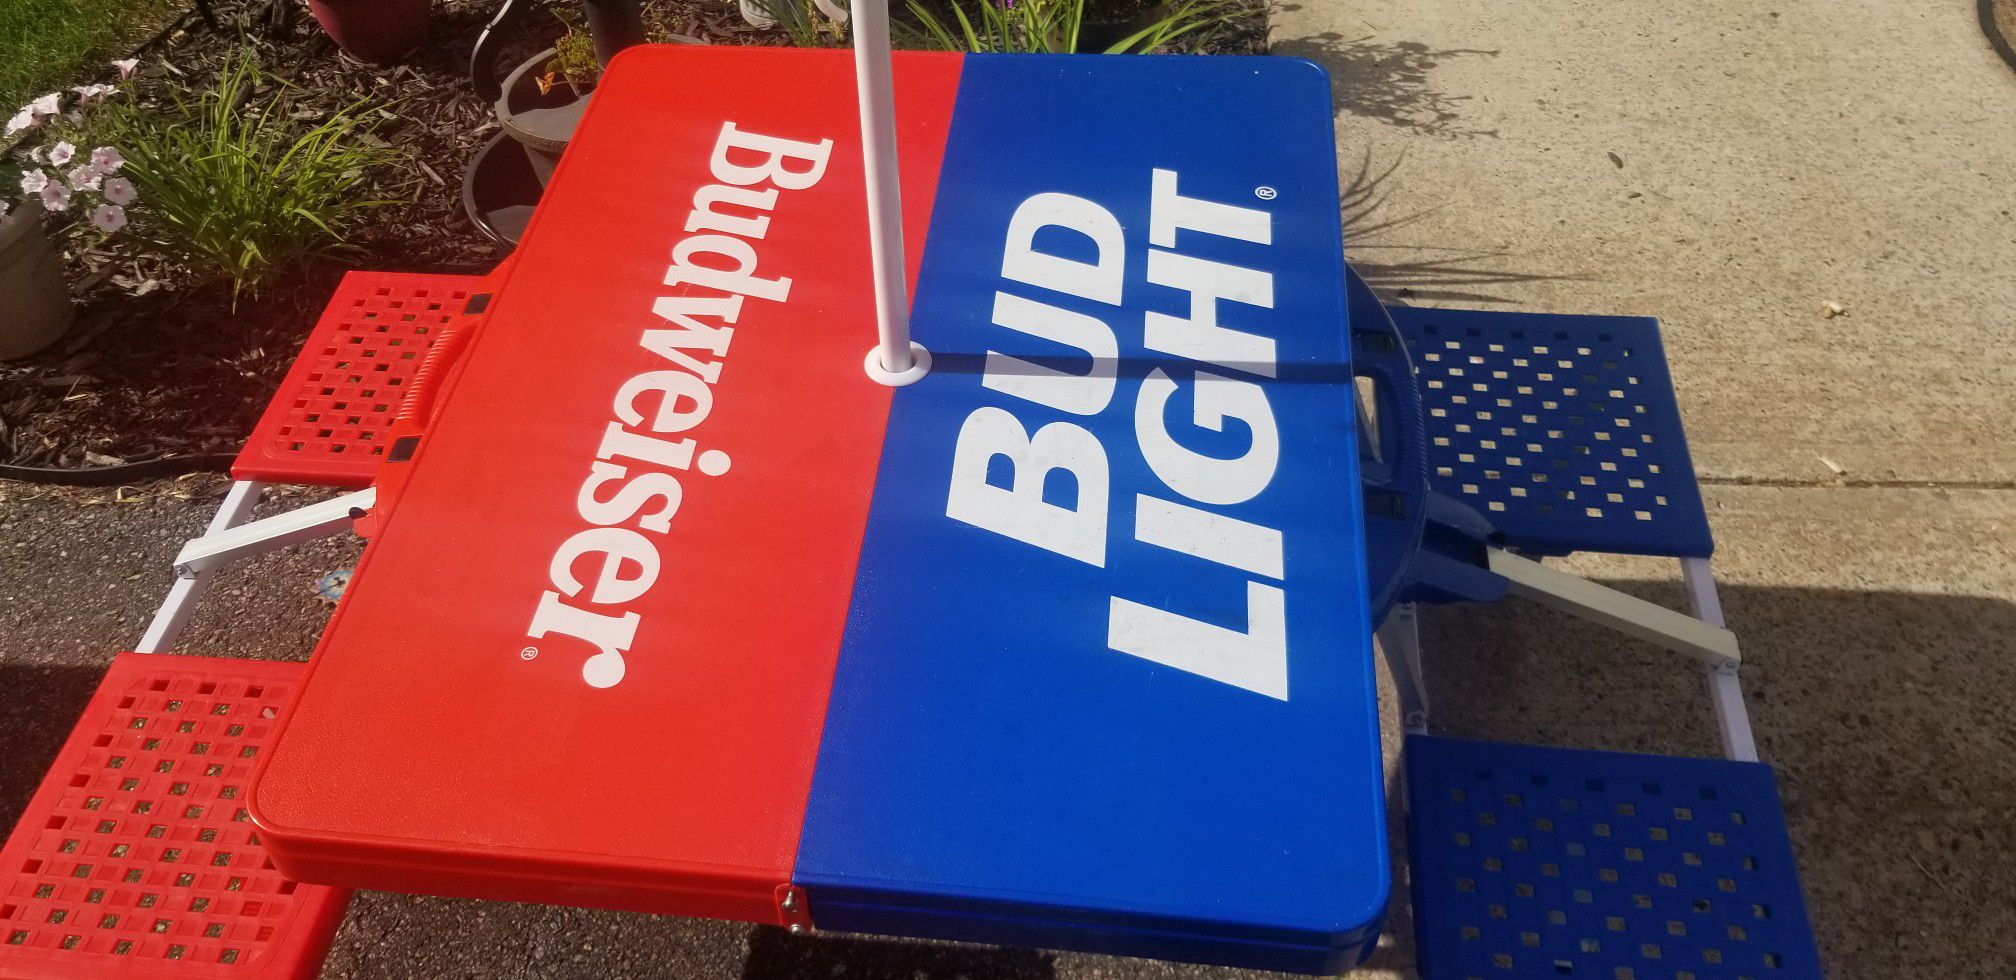 Budweiser/budlight beach party picnic table with umbrella